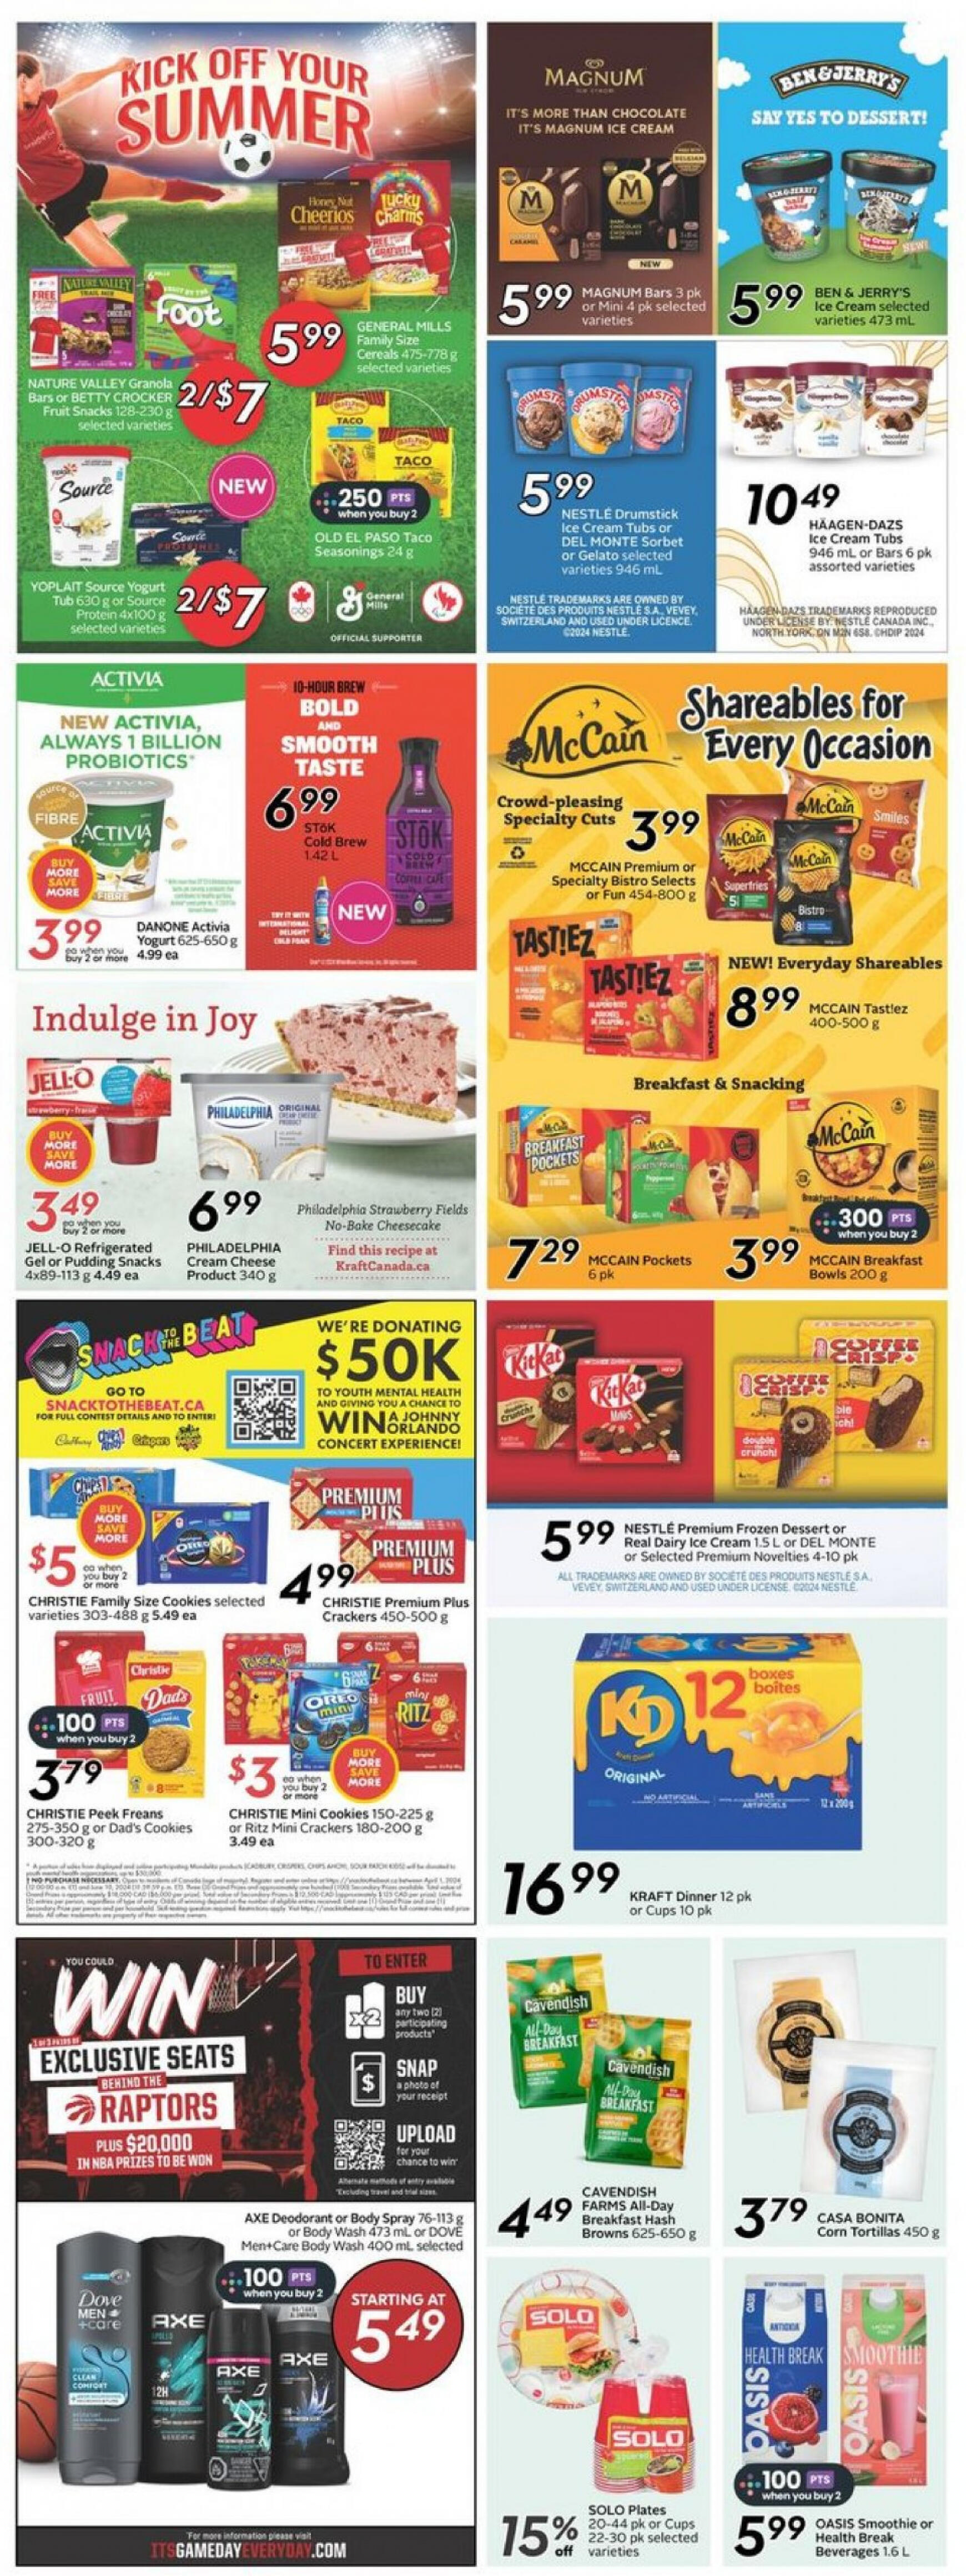 sobeys - Sobeys - Weekly Flyer - Ontario flyer current 06.06. - 12.06. - page: 19